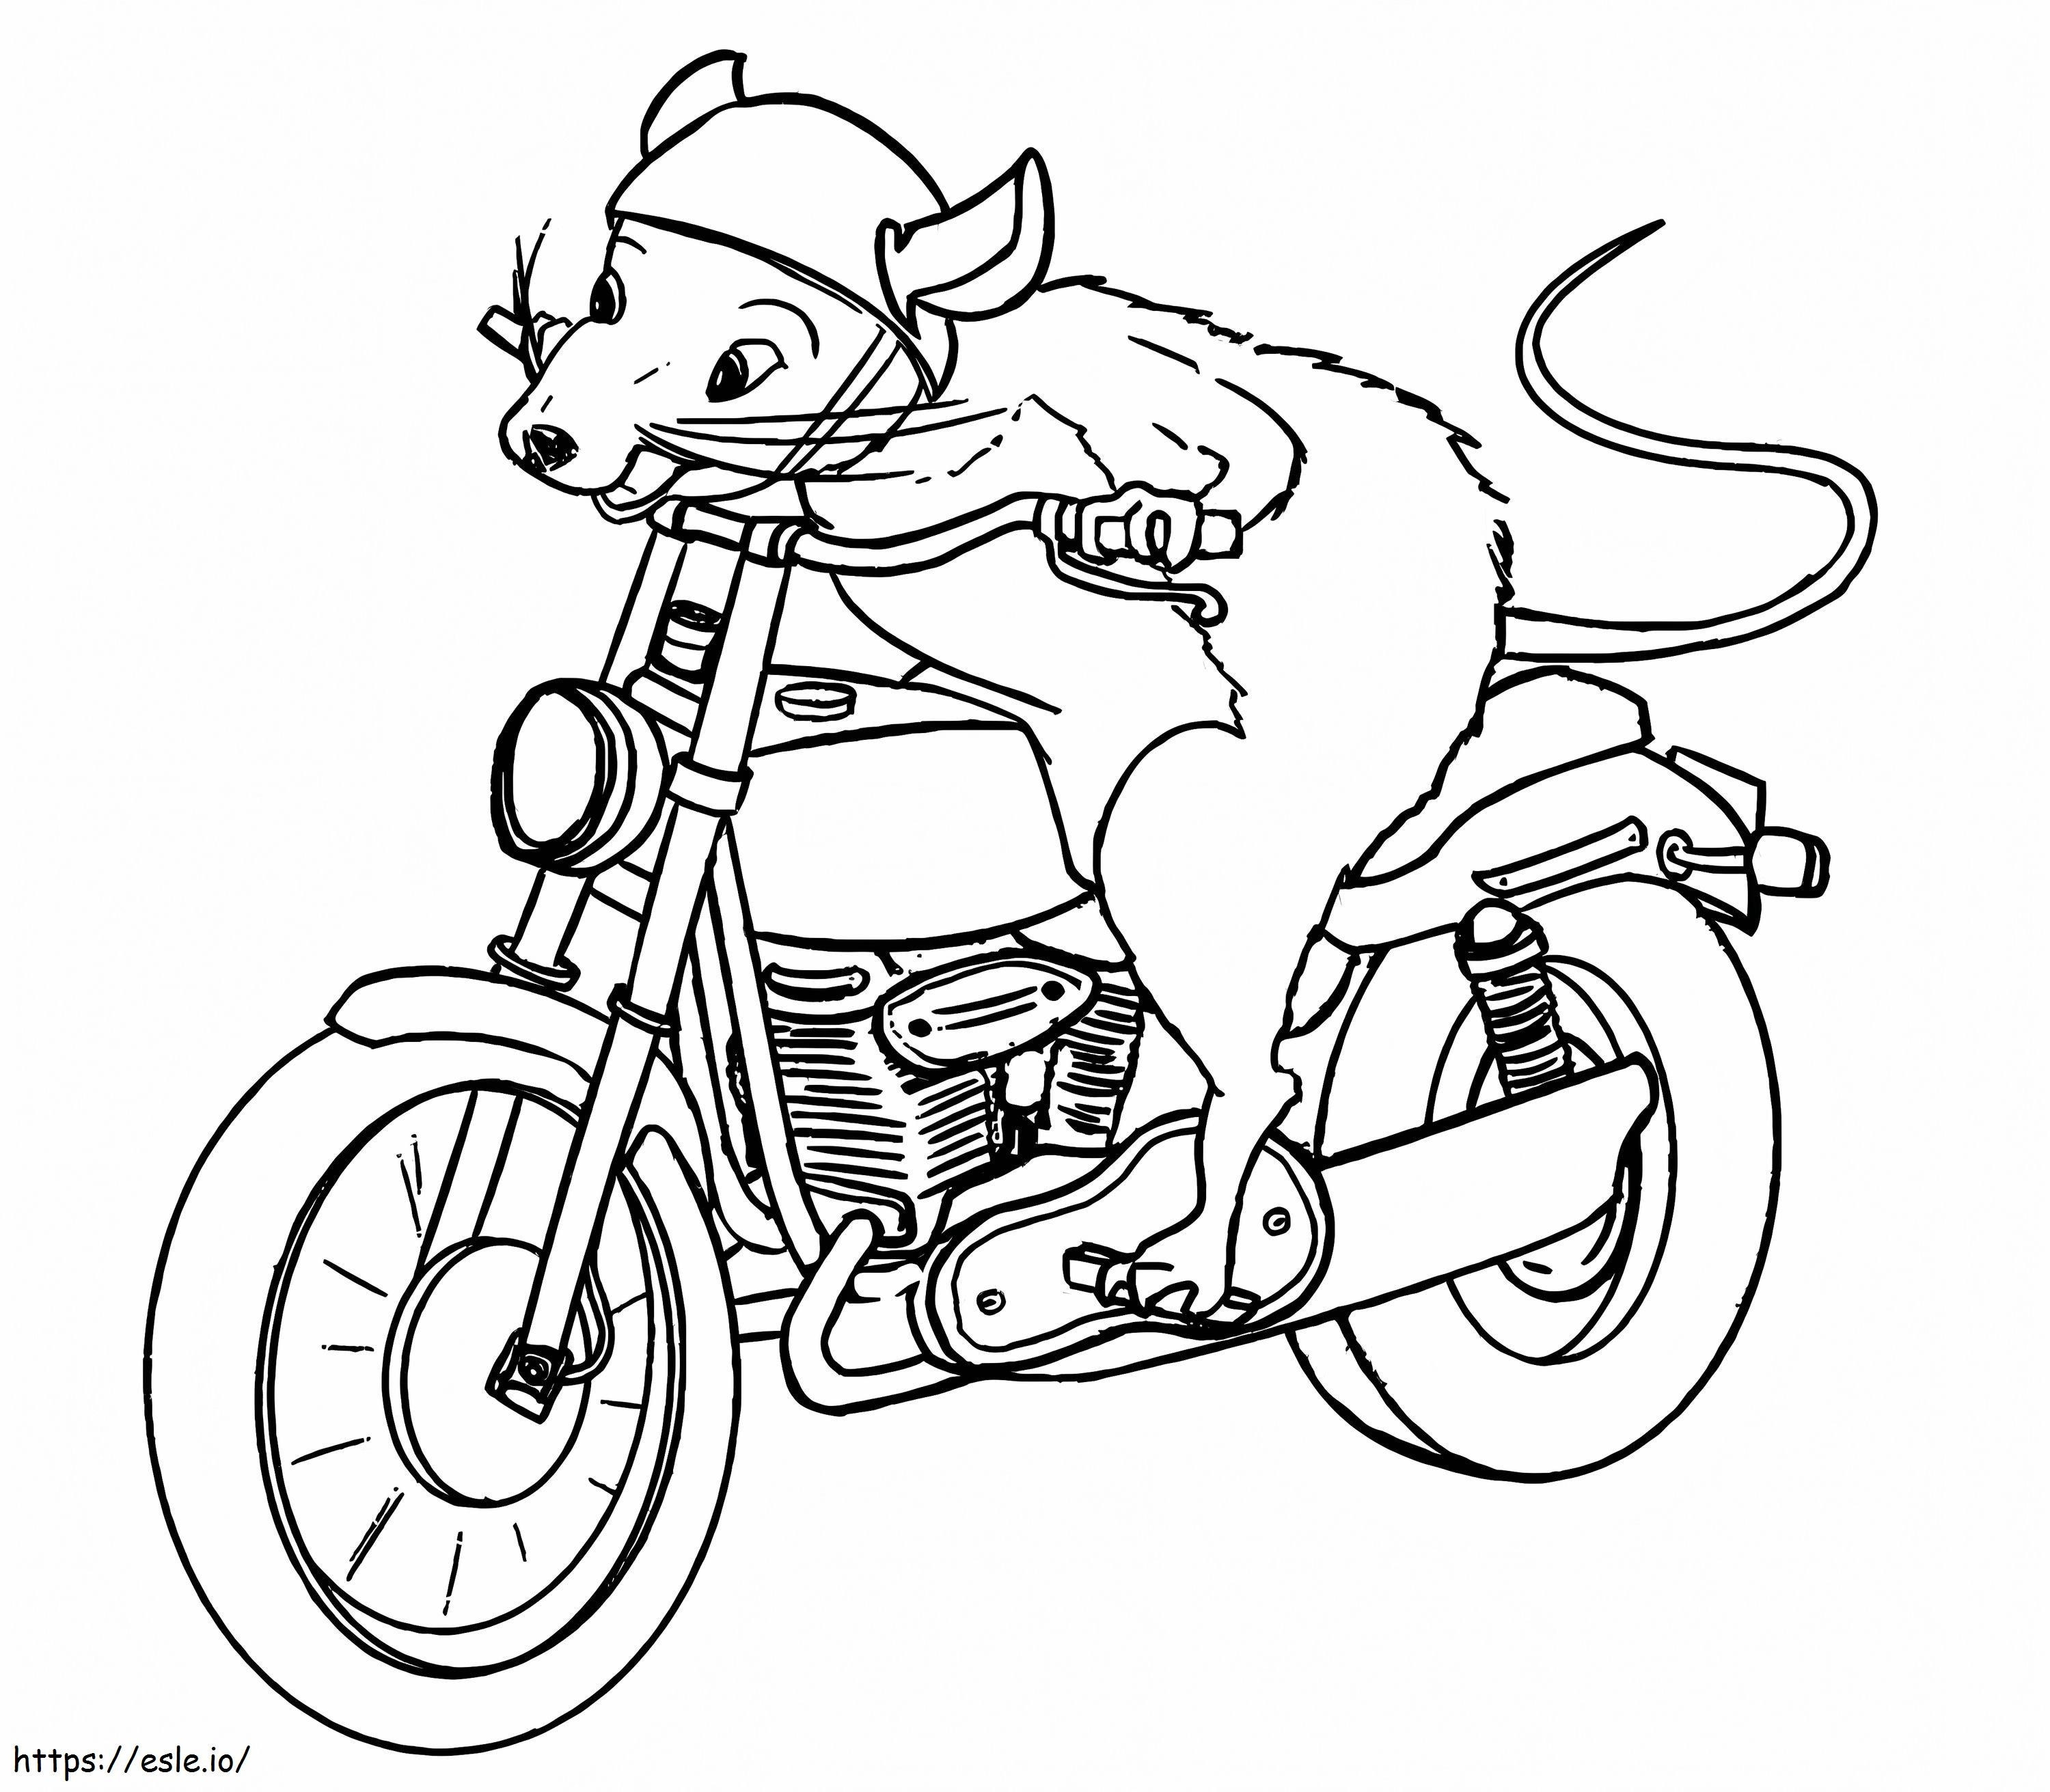 Mouse Riding Motorcycle coloring page